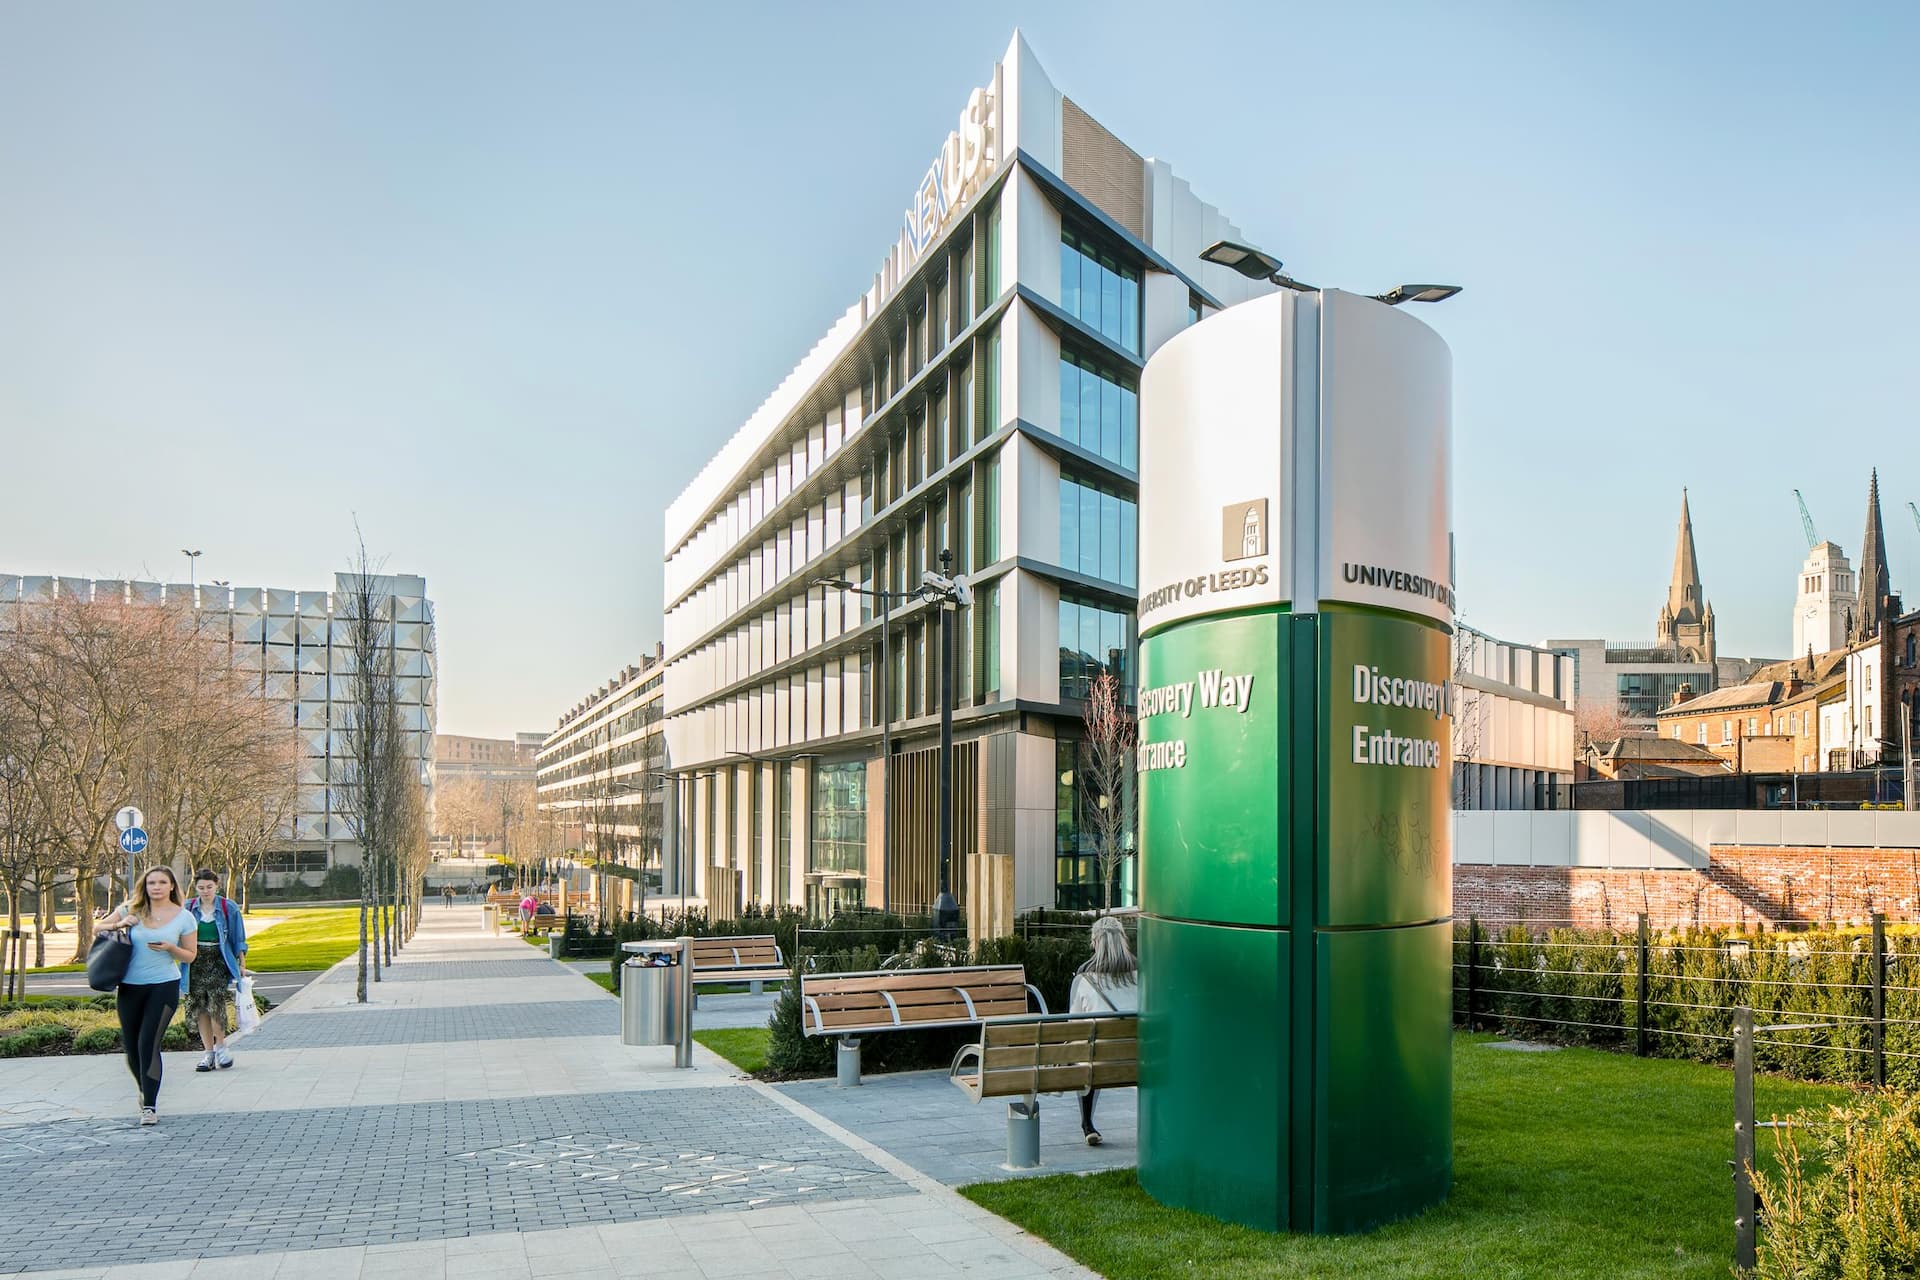 Nexus building on the University of Leeds campus enables businesses from all sectors to connect with the expertise, talent and facilities at the University of Leeds. Working together to accelerate and de-risk innovation and maximise commercial returns.